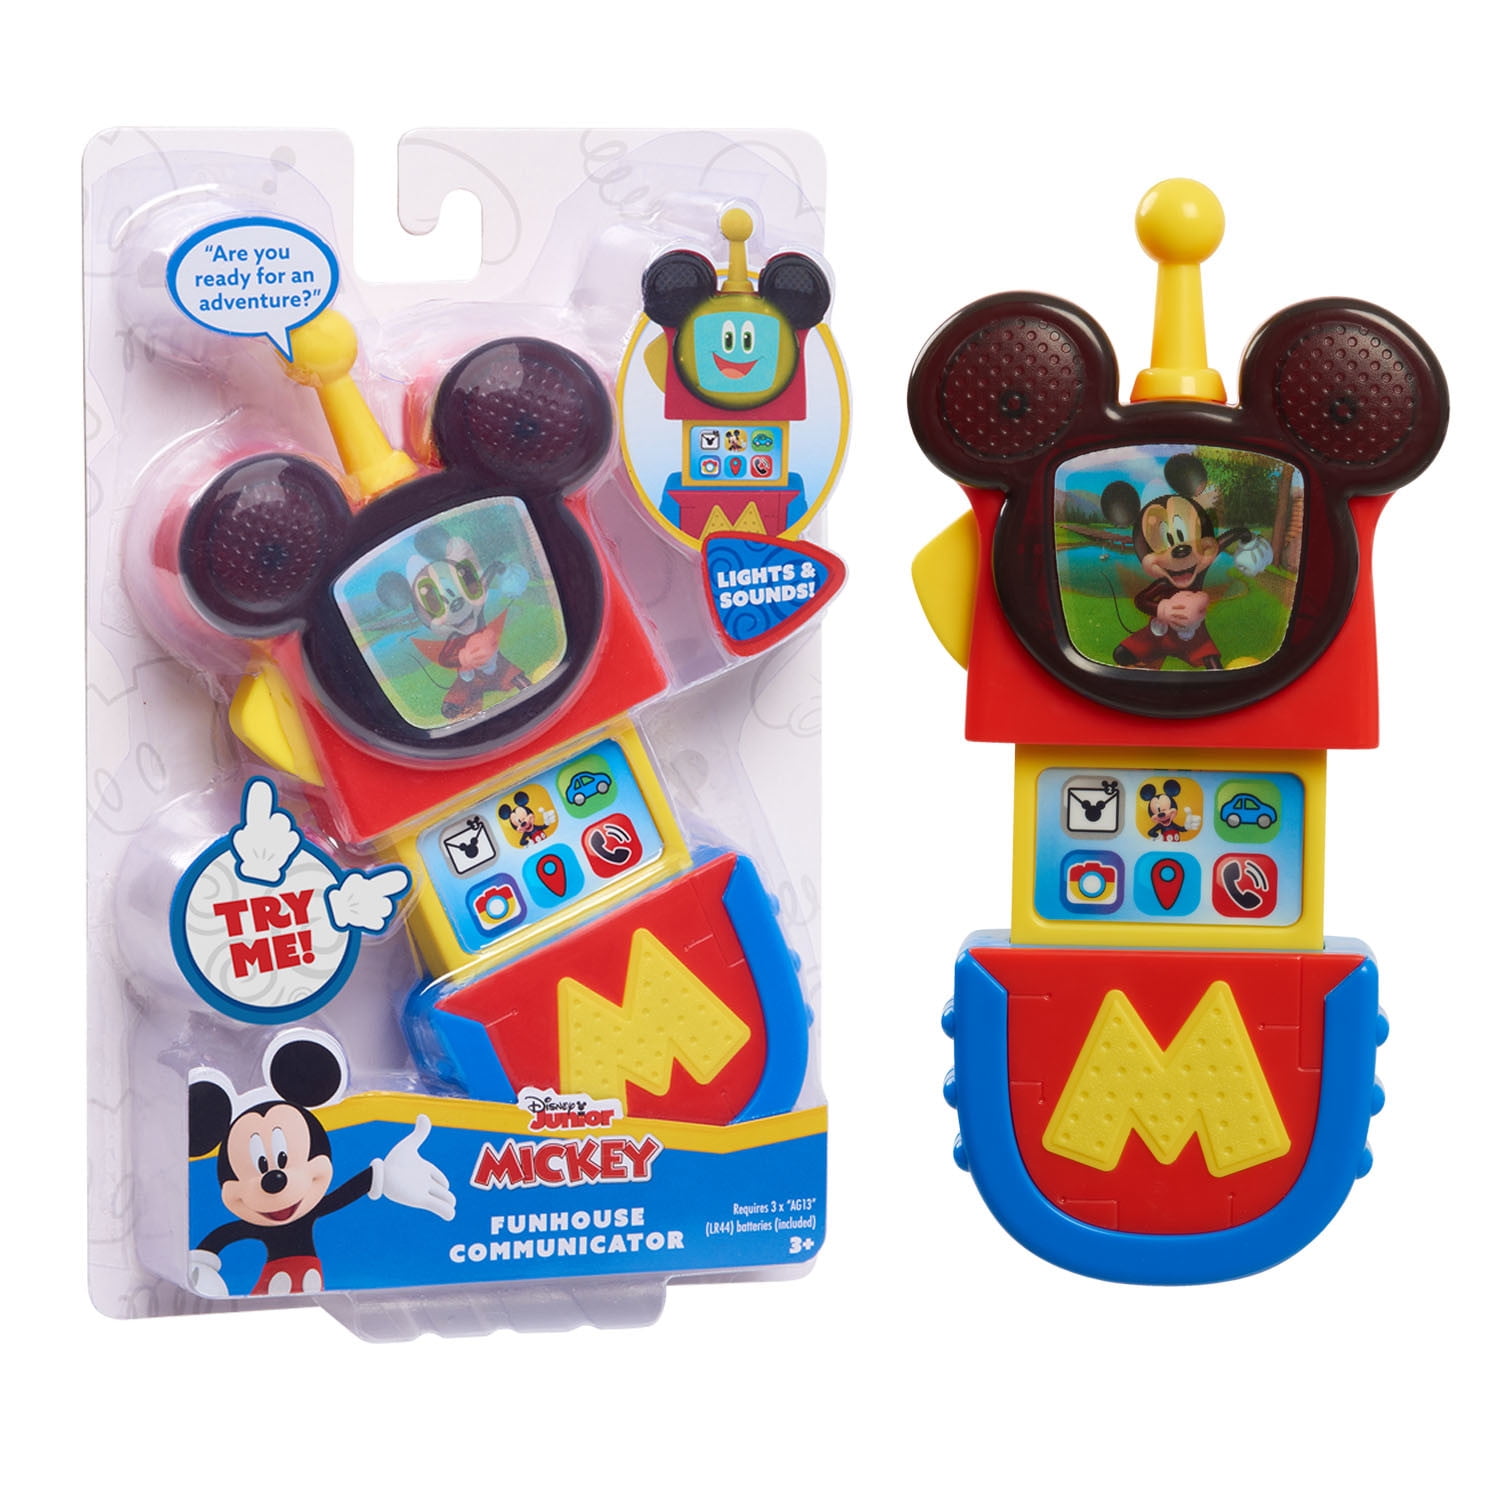 Disney Junior Mickey/Minnie Mouse Clubhouse Toy Playsets Brand New 